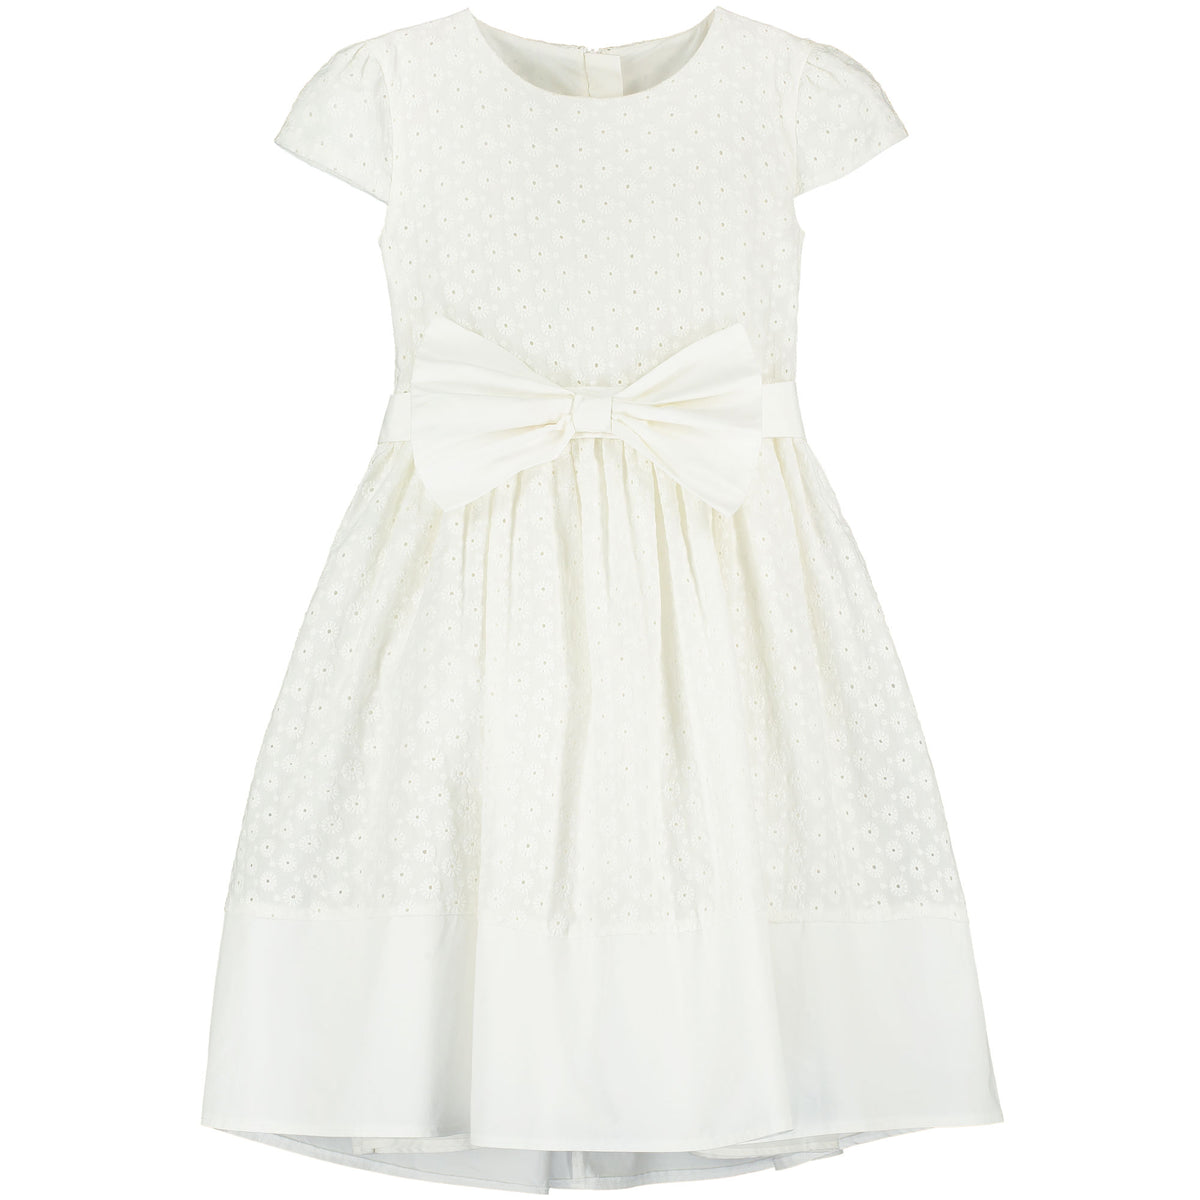 Embroidered Cotton Bow Girls Occasion Dress White | Holly Hastie London